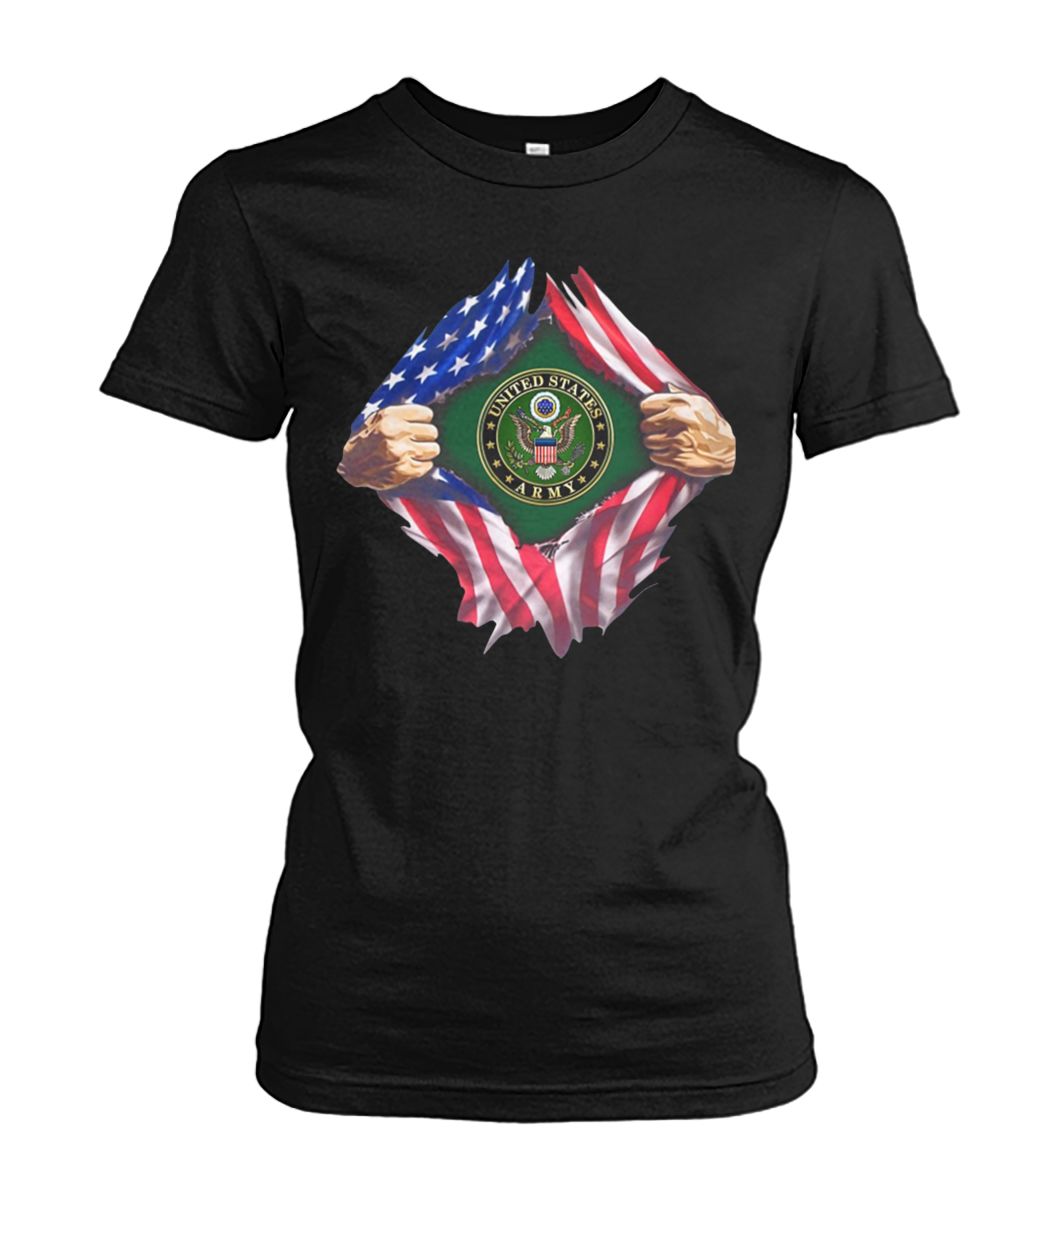 4th of july united states army inside american flag women's crew tee